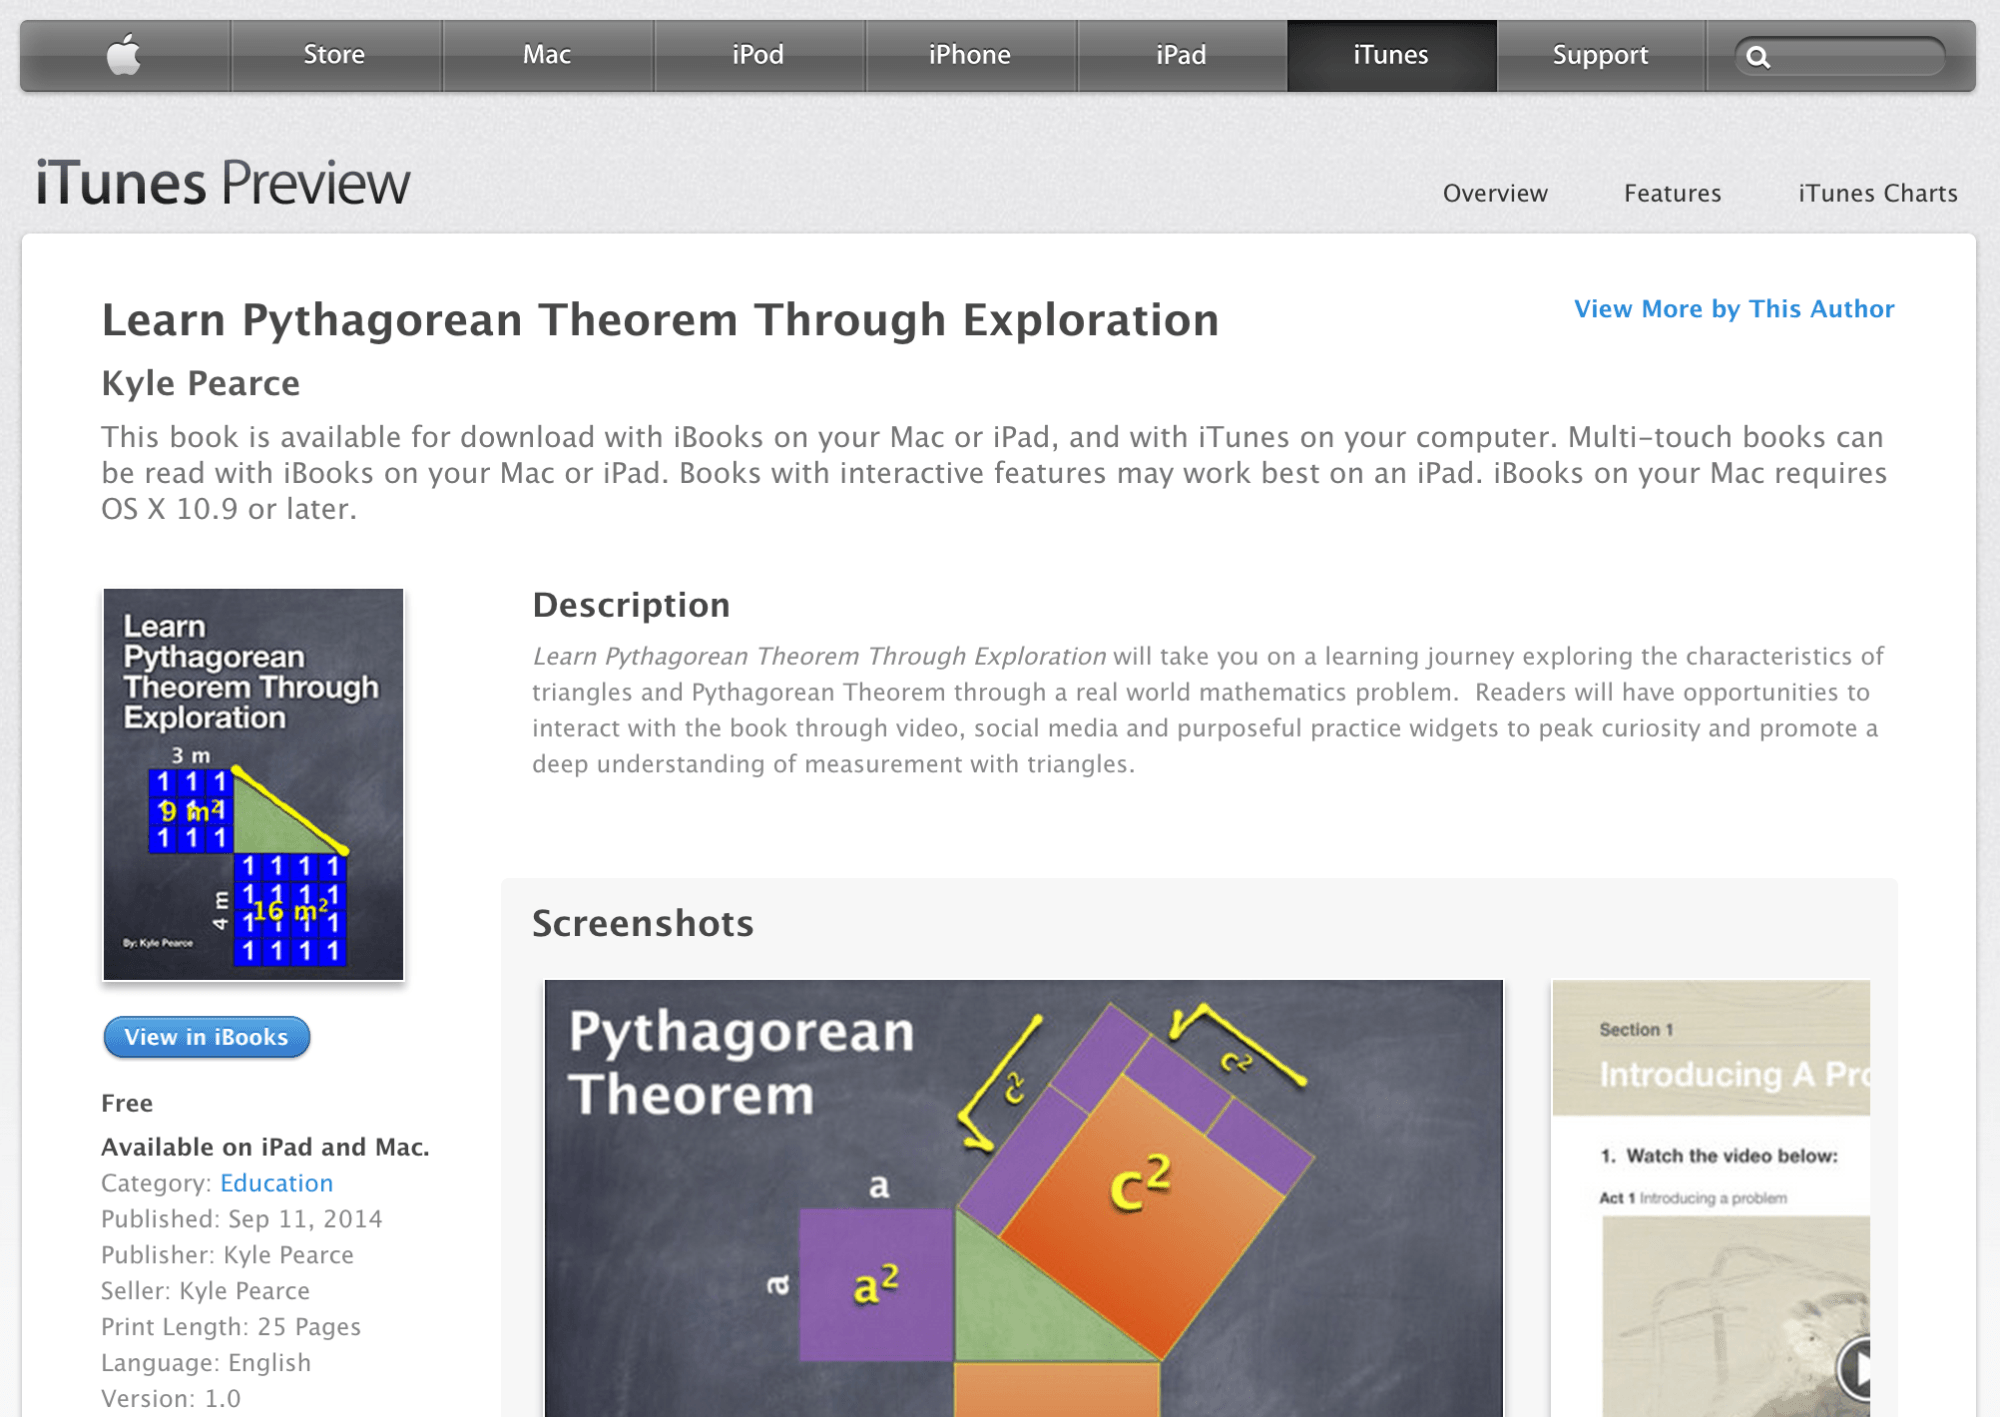 Pythagorean Theorem Interactive iBook Now Available!